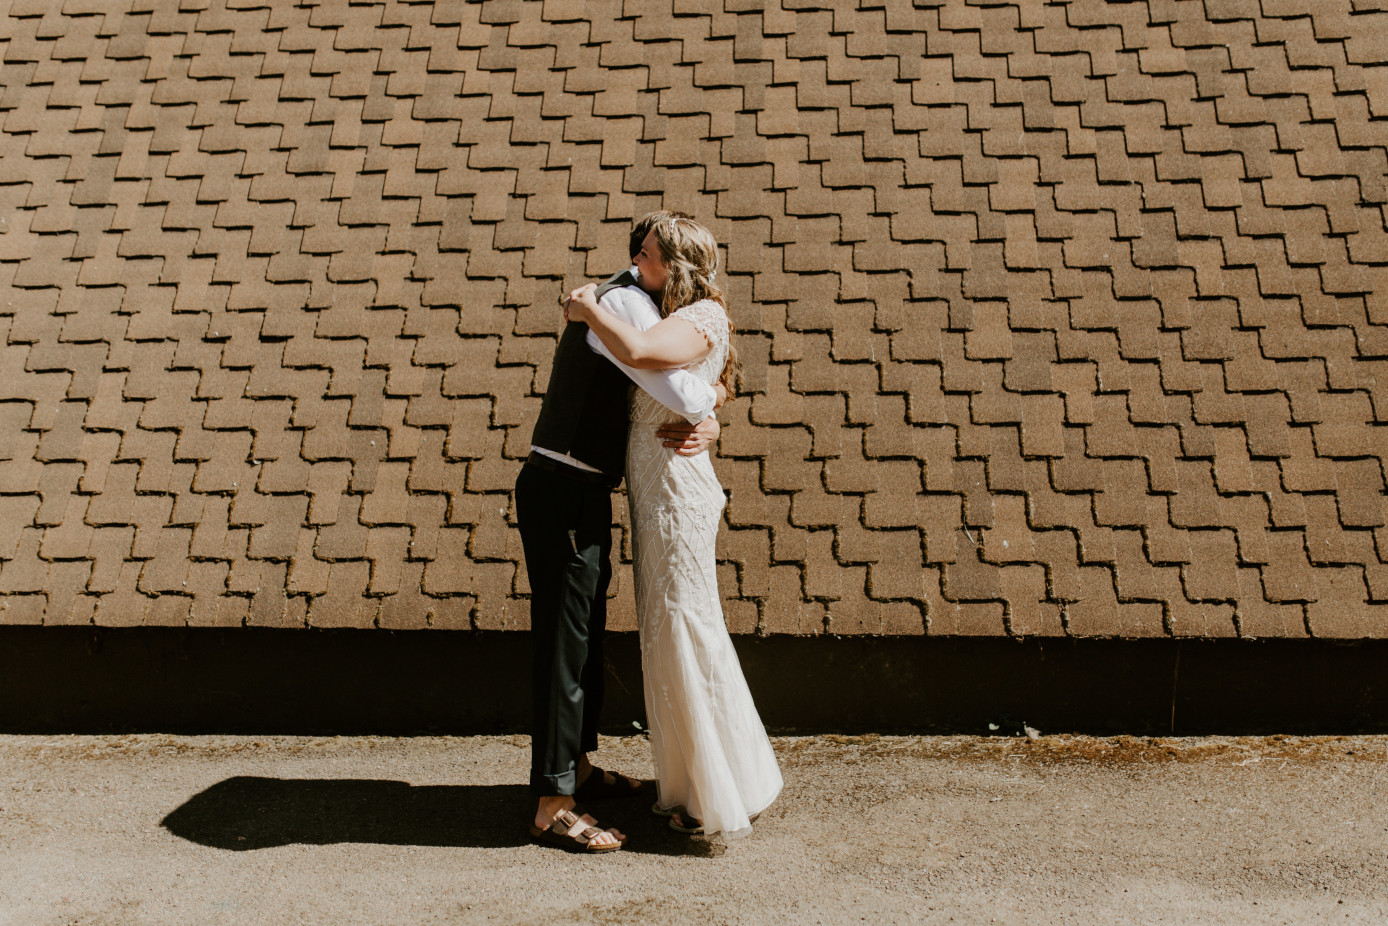 Dan and Hannah in Corvallis, Oregon during their Adventure. Intimate wedding photography in Corvallis Oregon by Sienna Plus Josh.